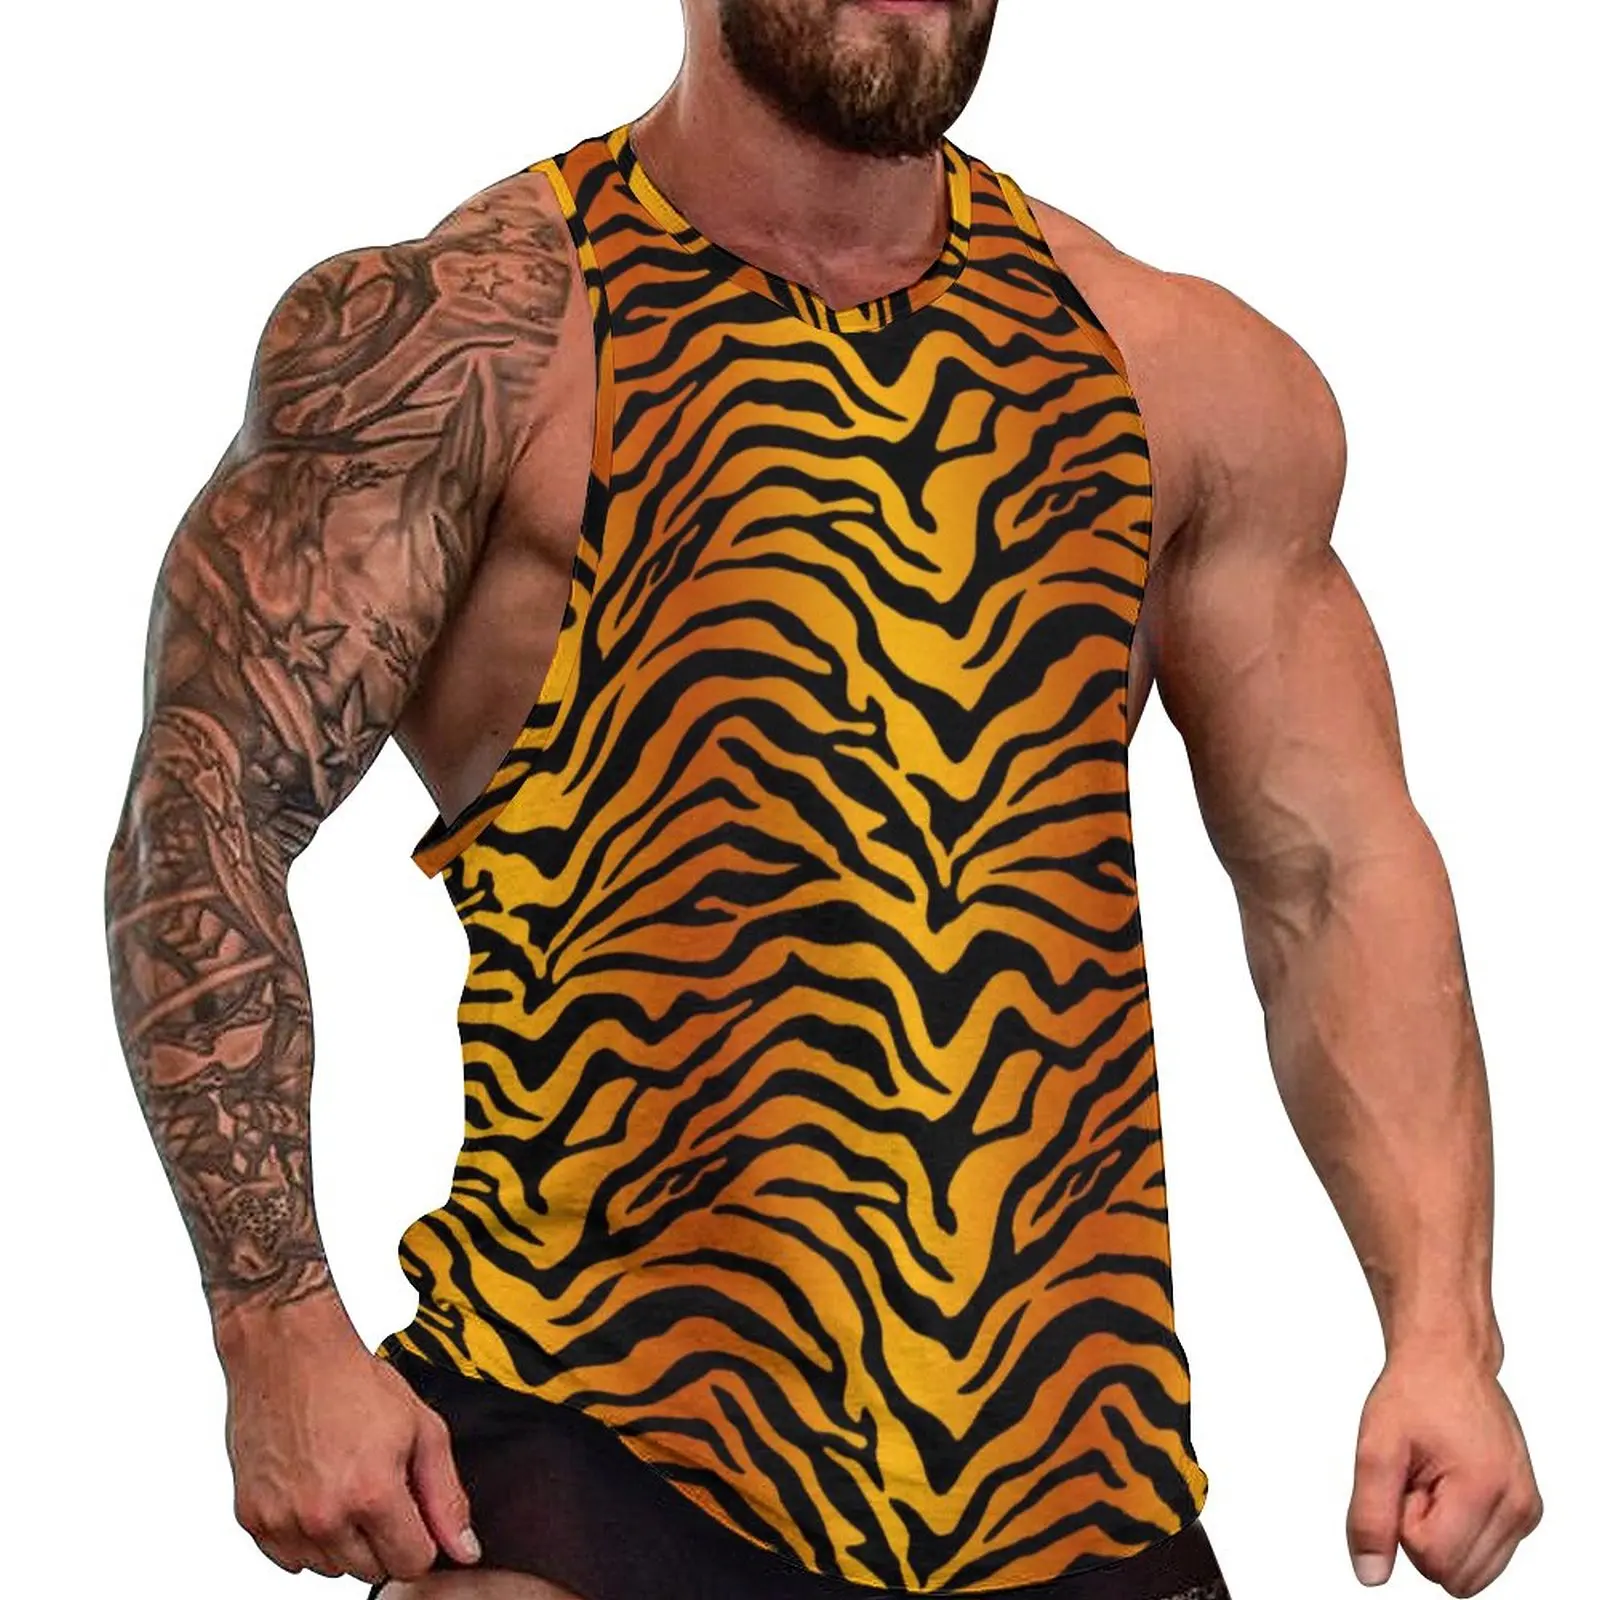 

Tiger Print Tank Top Black Stripes Muscle Tops Beach Bodybuilding Males Graphic Sleeveless Vests Plus Size